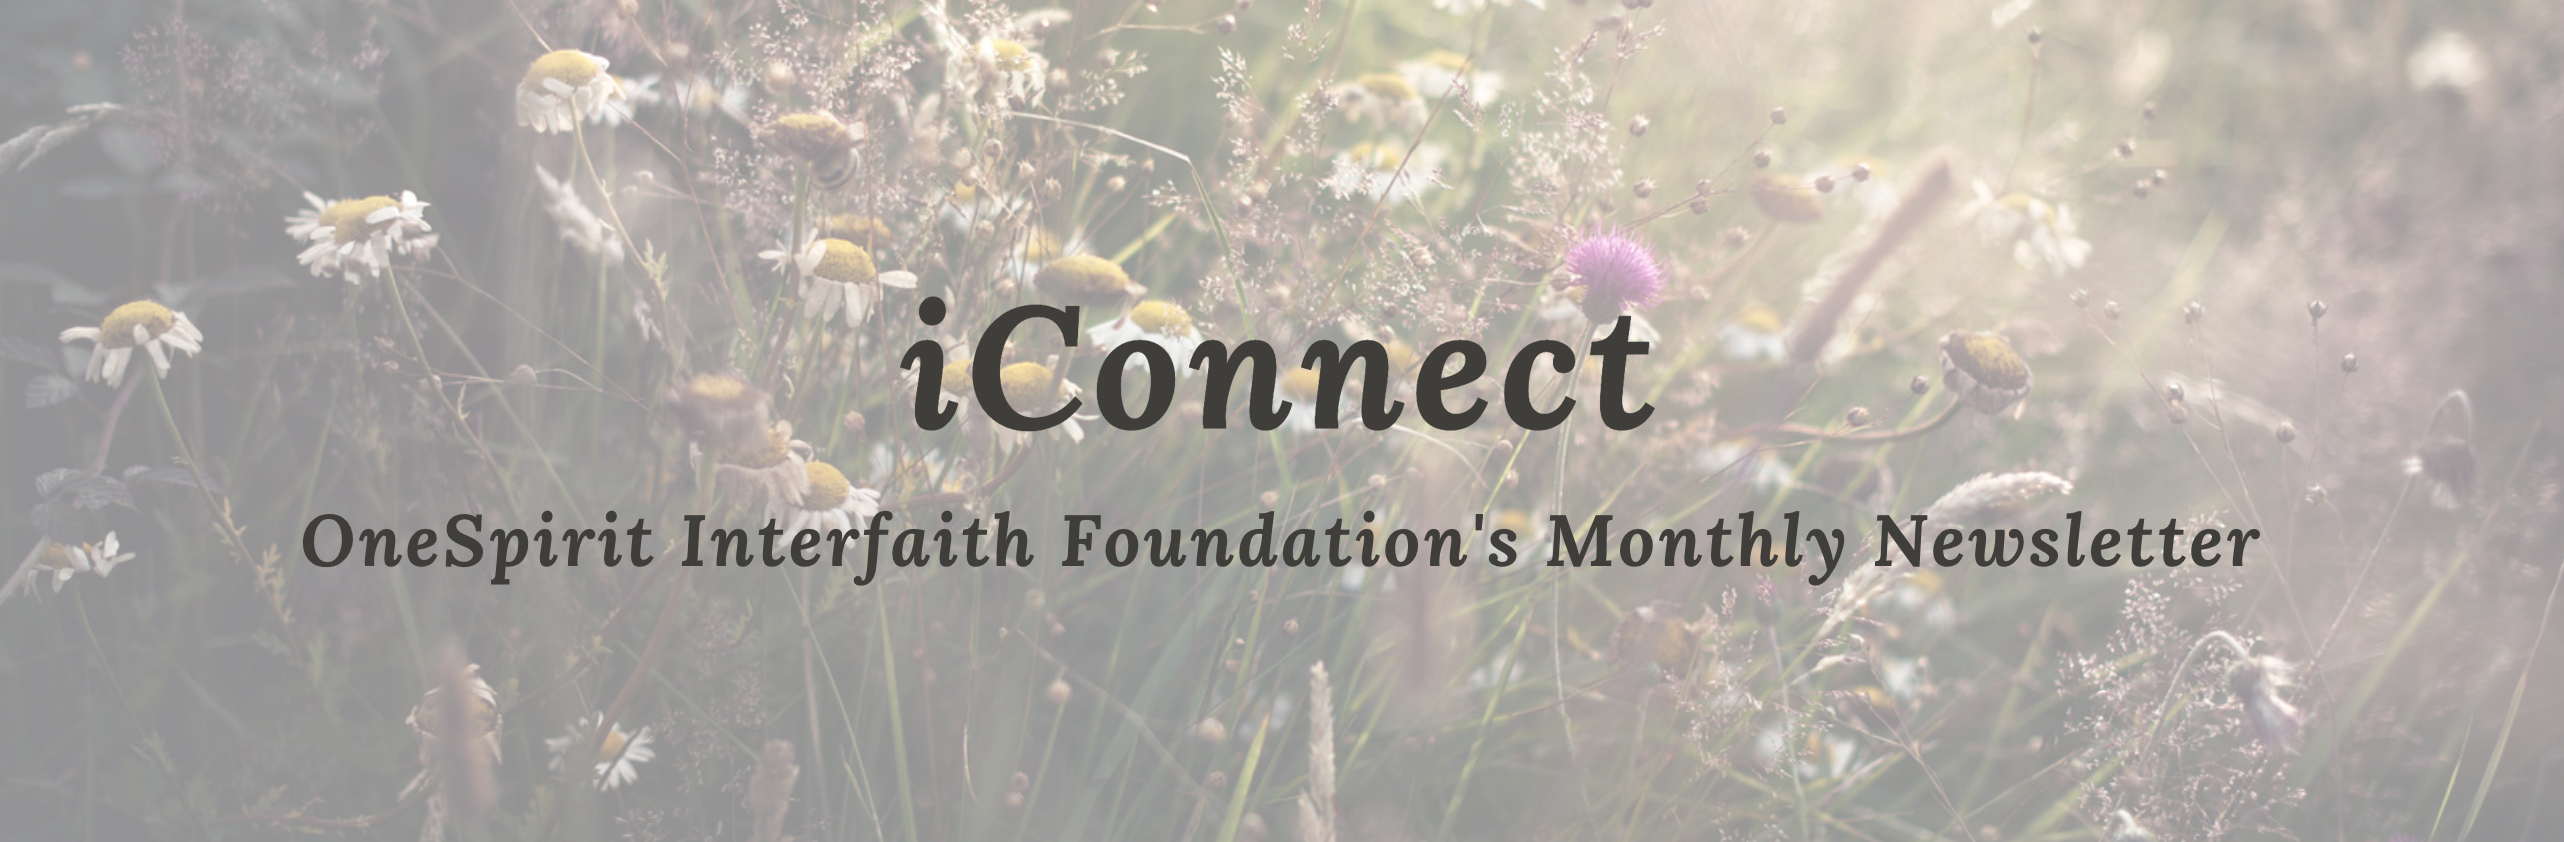 iConnect: This issue of OneSpirit’s Newsletter marks the opening of enrolment for our<br />
Spiritual Development and Ministry Training! Dive into everything you need to<br />
know about the Birch Pathway - detailed just below.